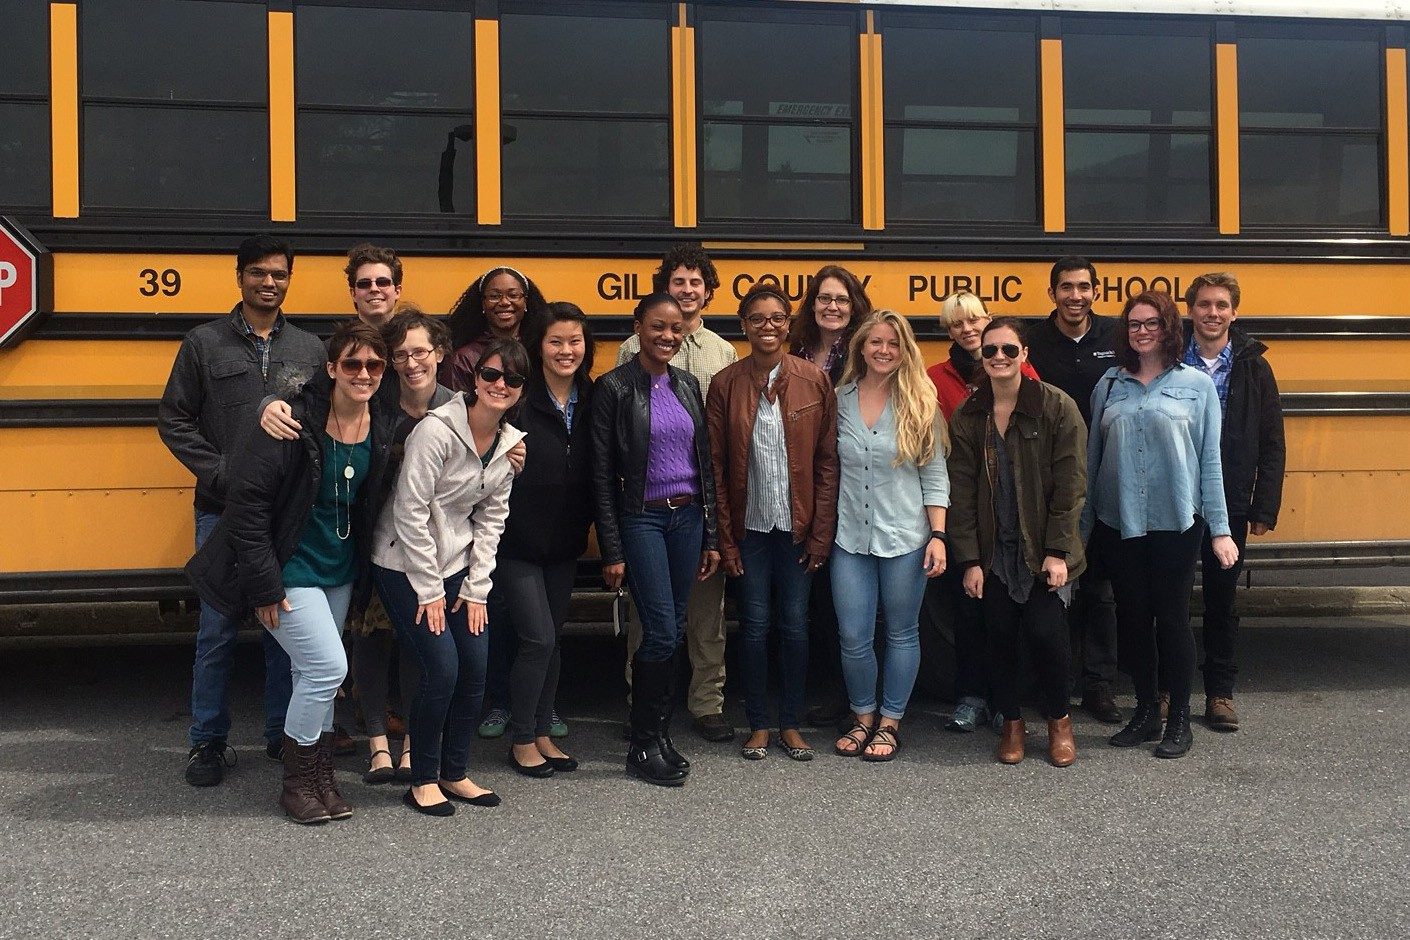 This photo shows 17 young adults (5 people of color) posed for a group photo in front of a yellow school bus with the words "Giles County Public Schools" on its side.